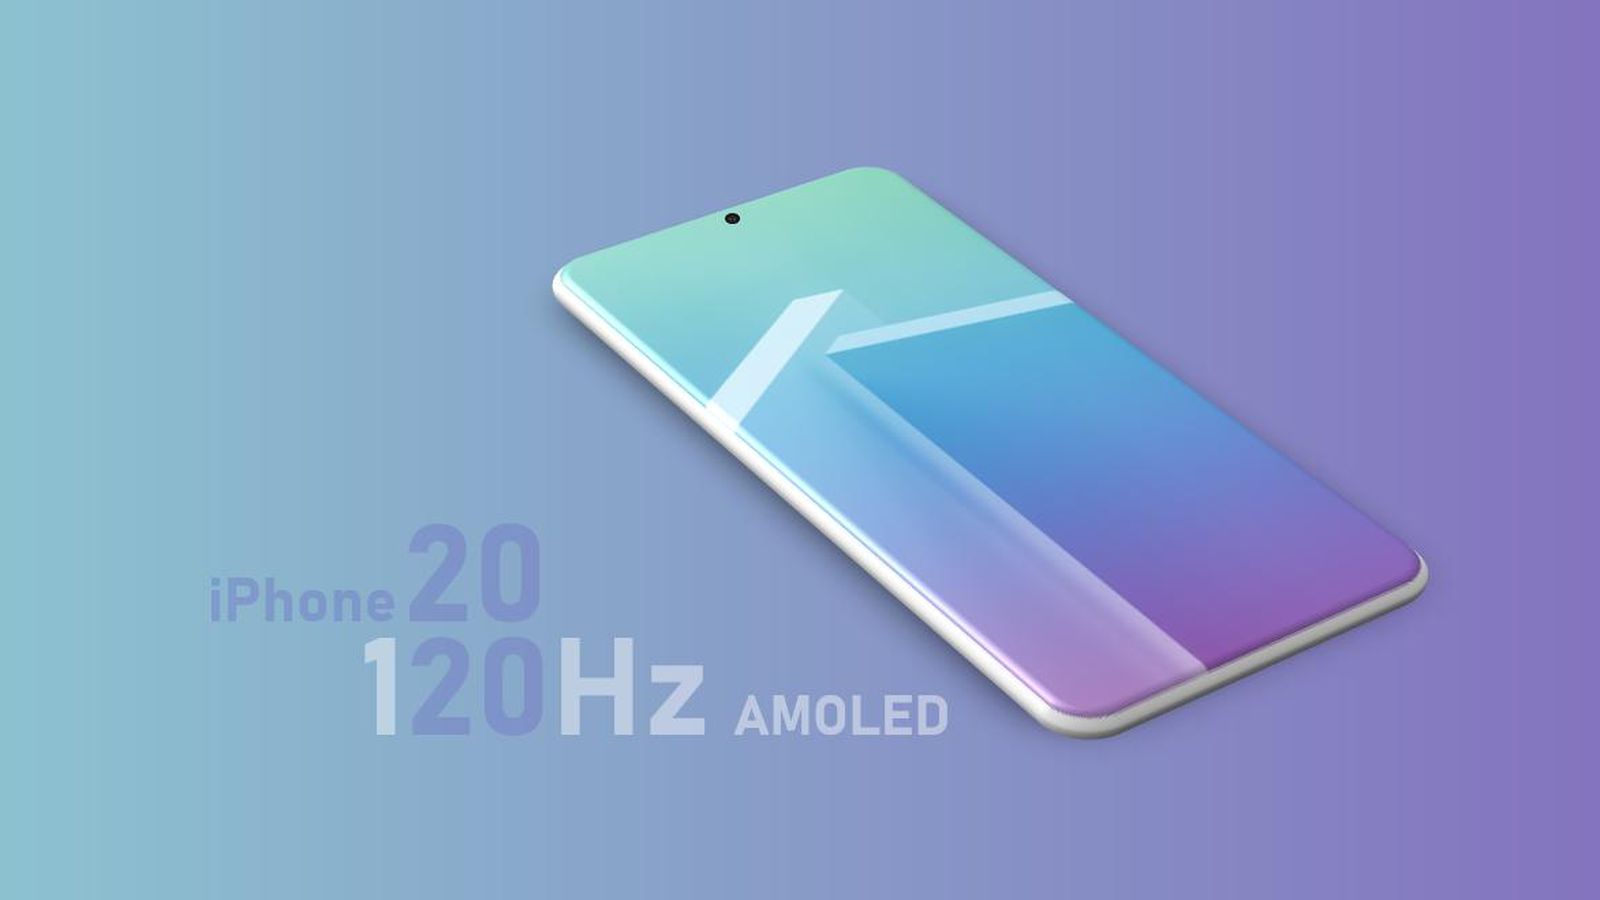 Leaker Iphone 12 Pro And Pro Max To Feature Faster 120hz Displays